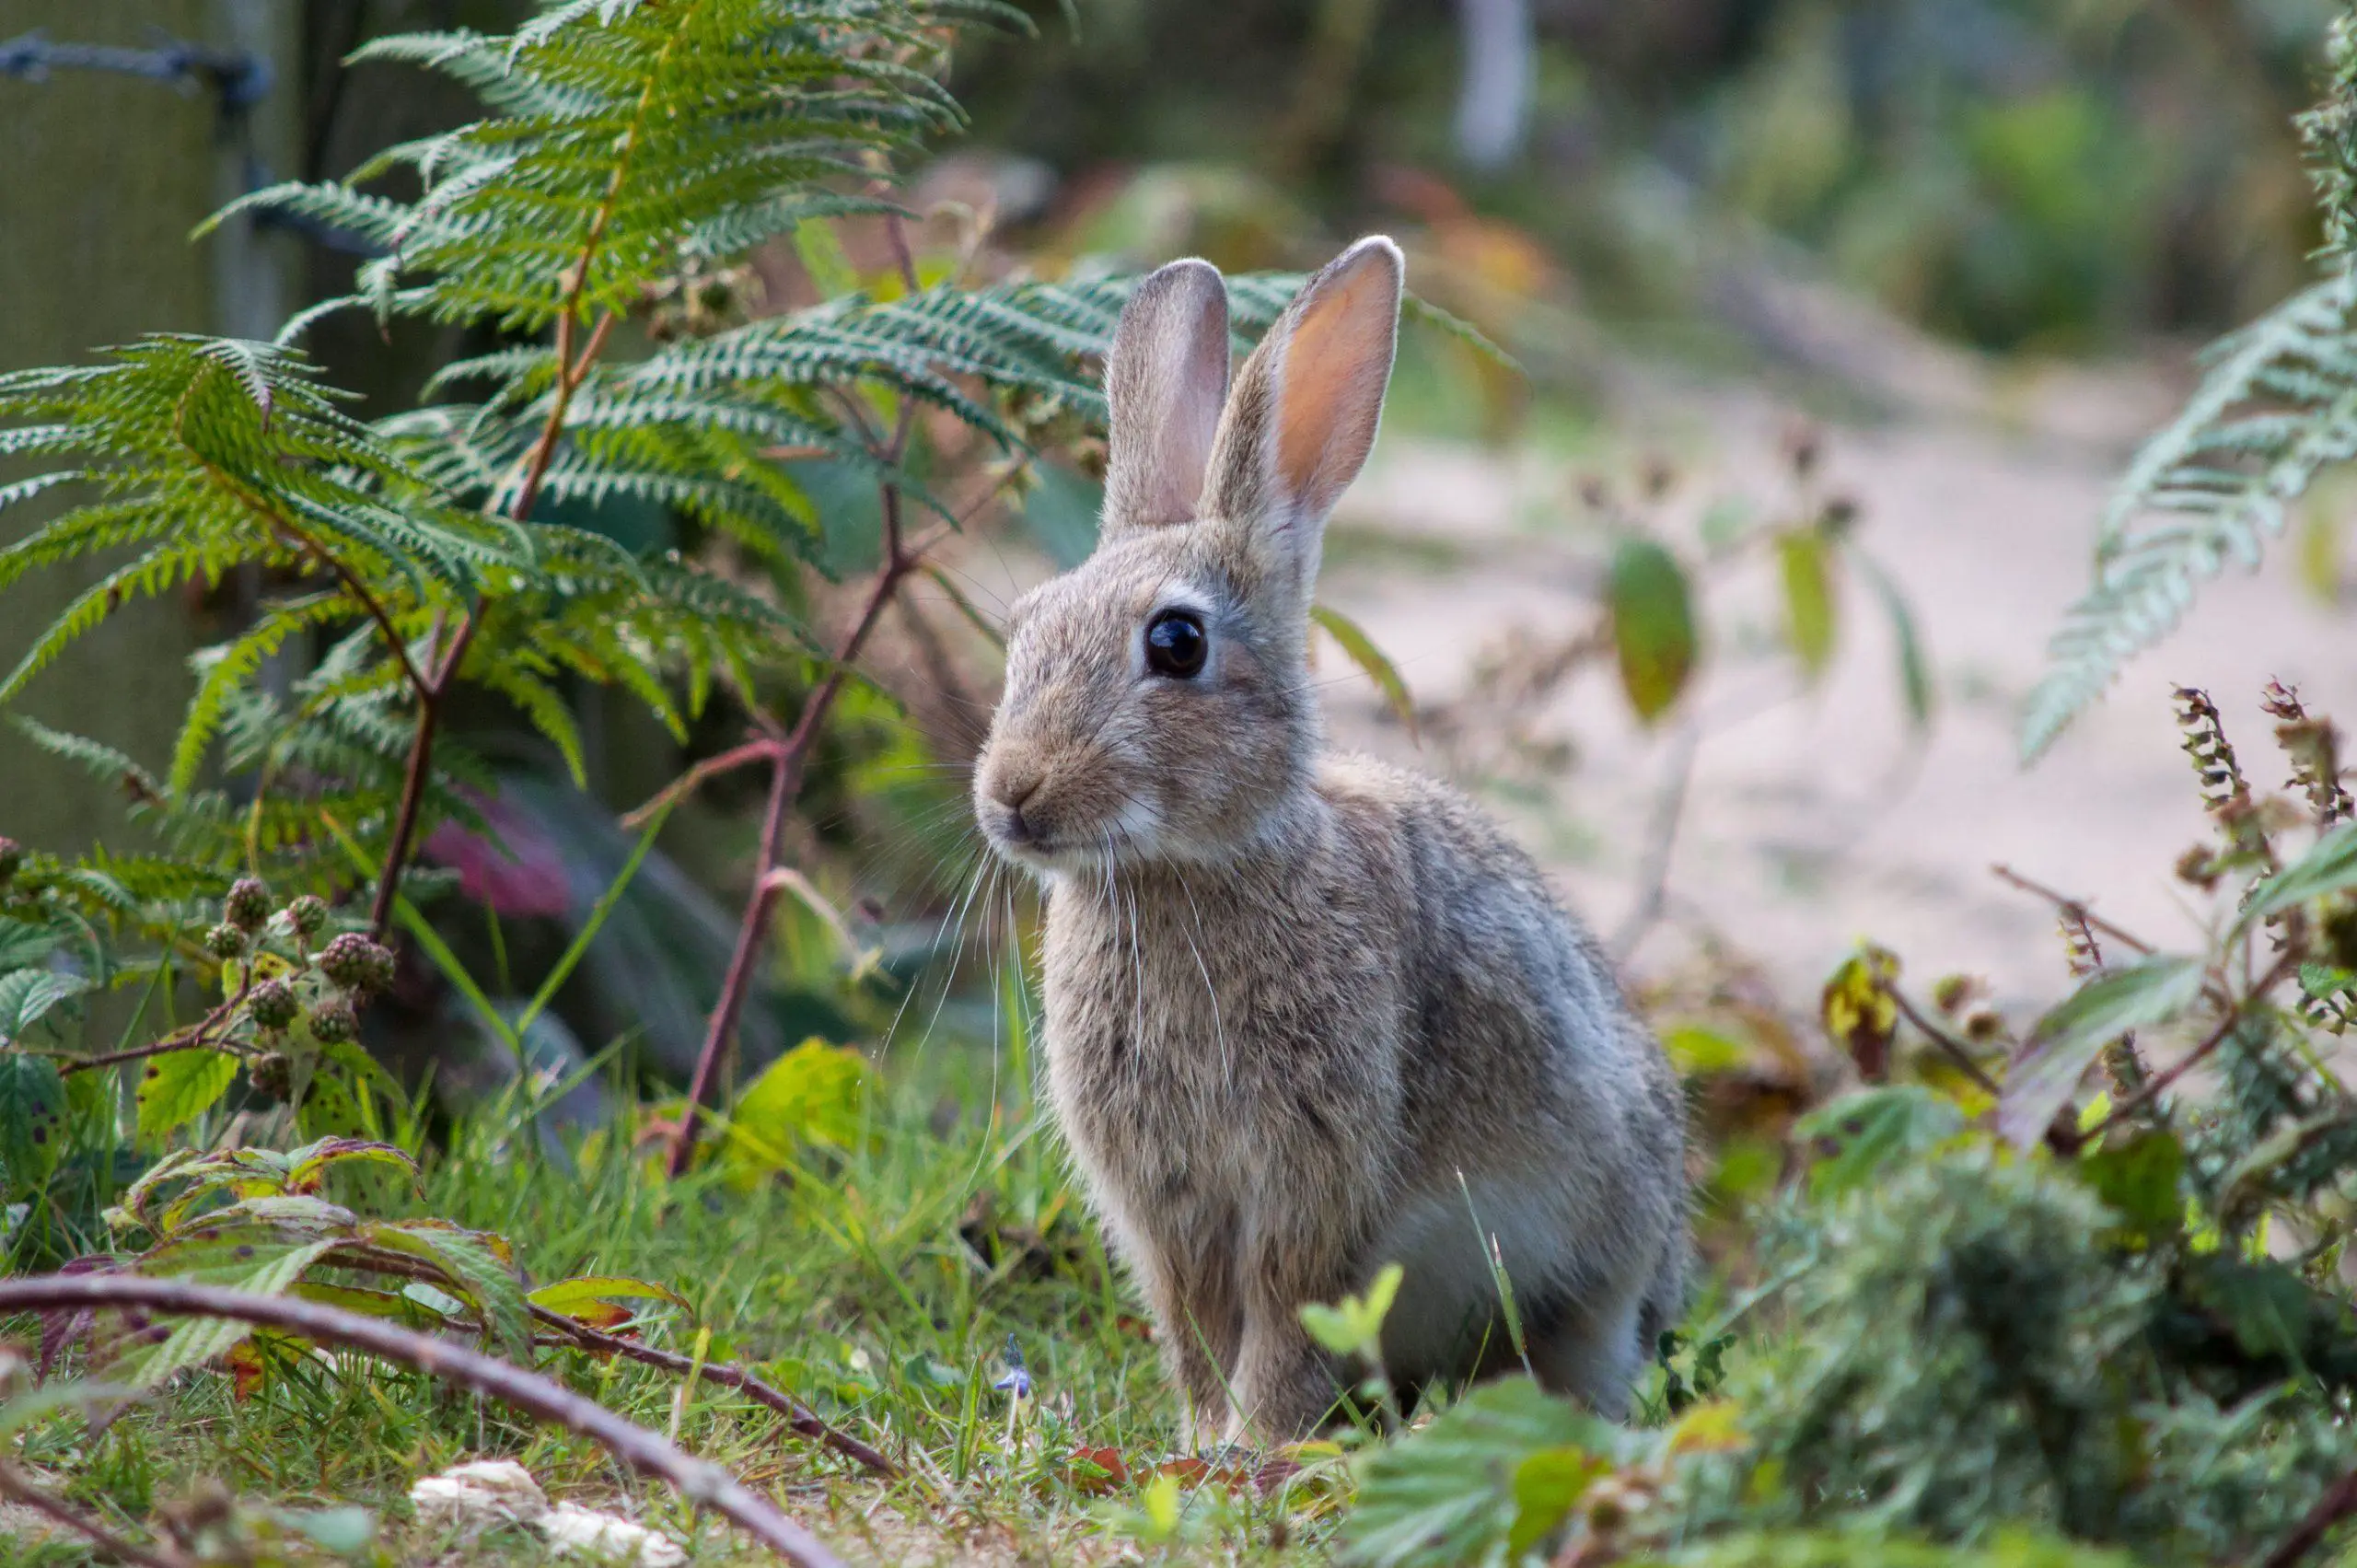 The young rabbit sitting comfortably among some ferns and other vegetation